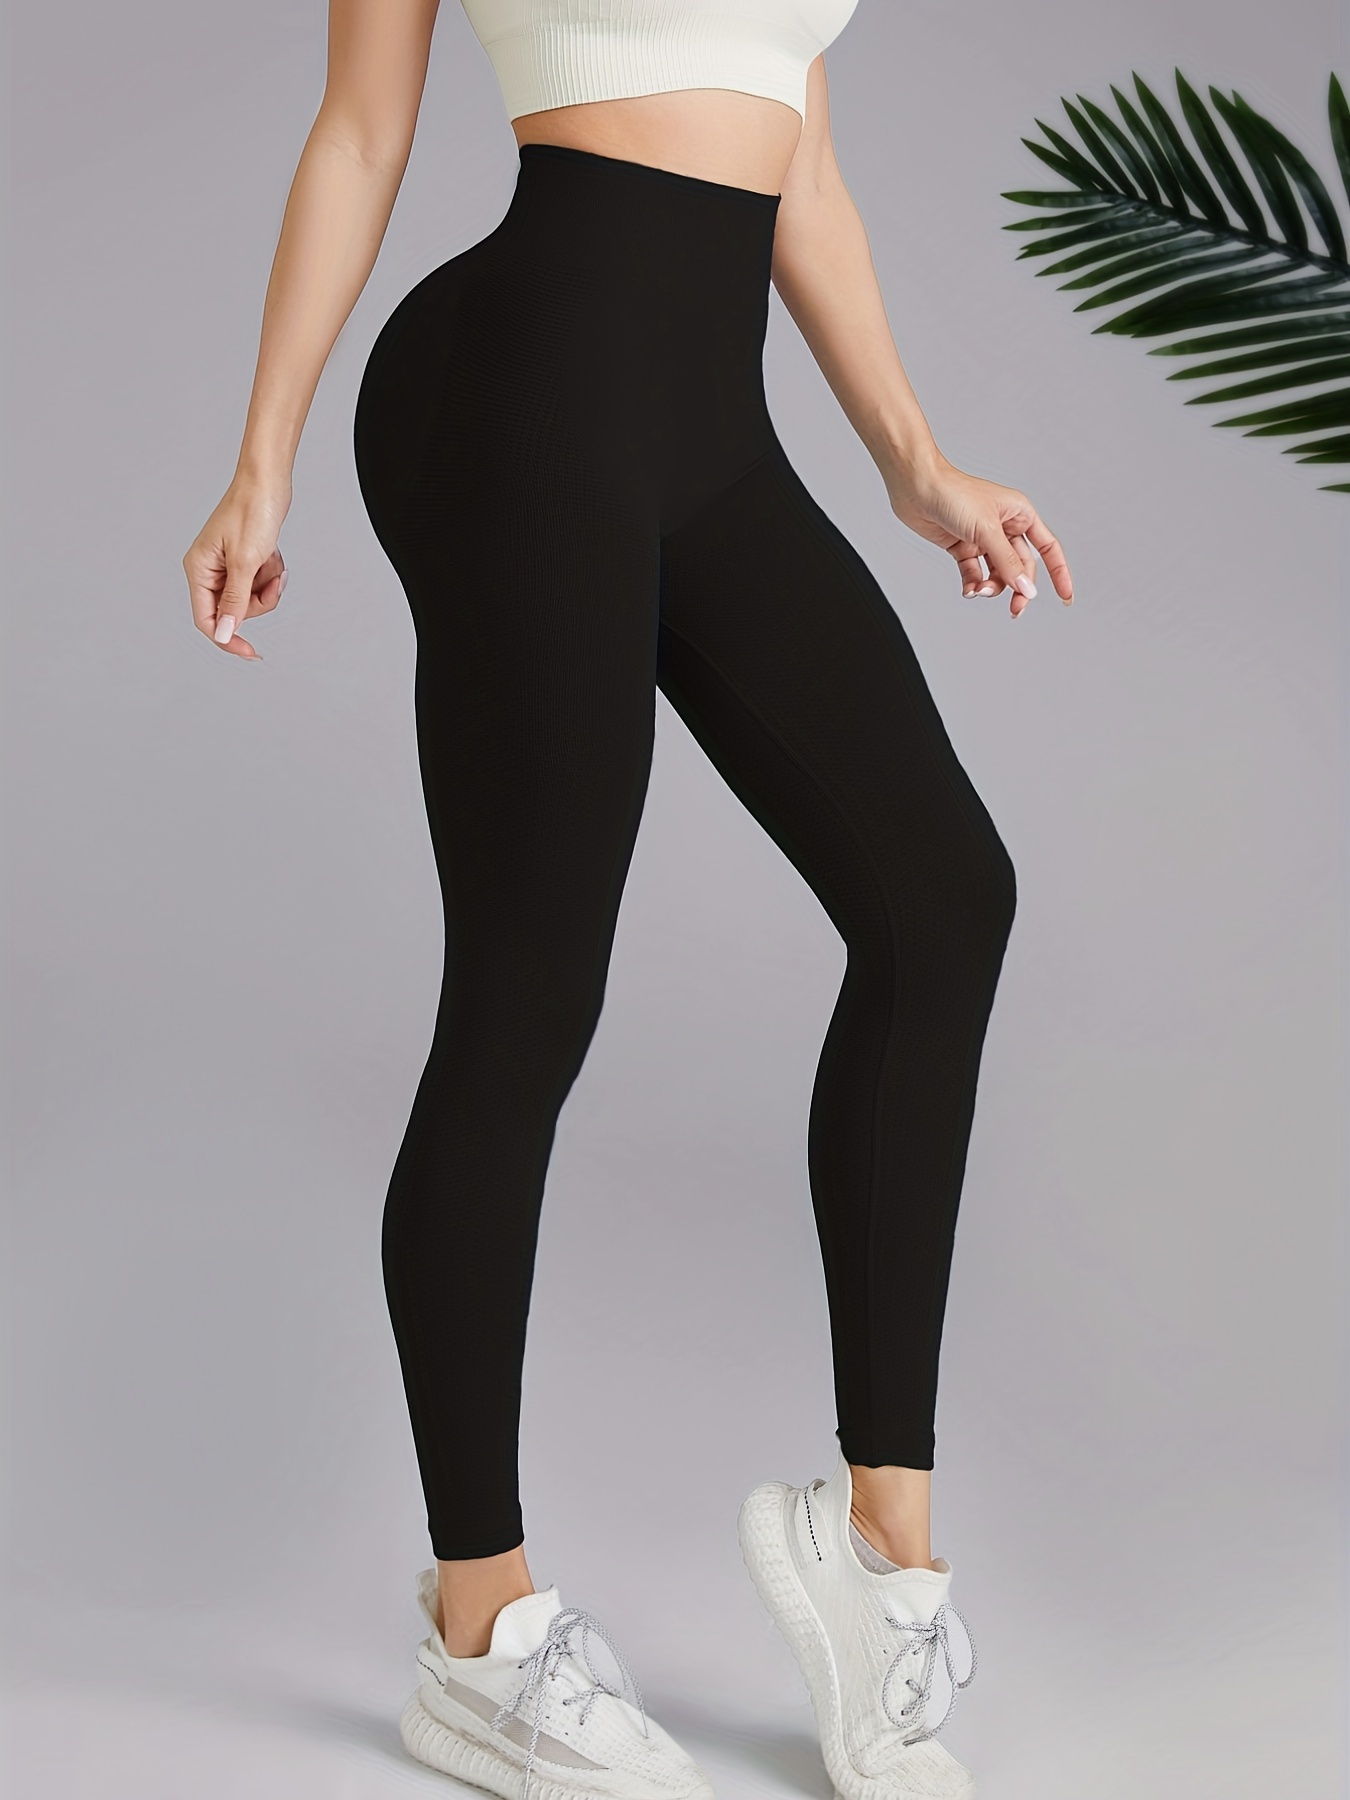 Stylish and Supportive Women's High Waist Compression Leggings